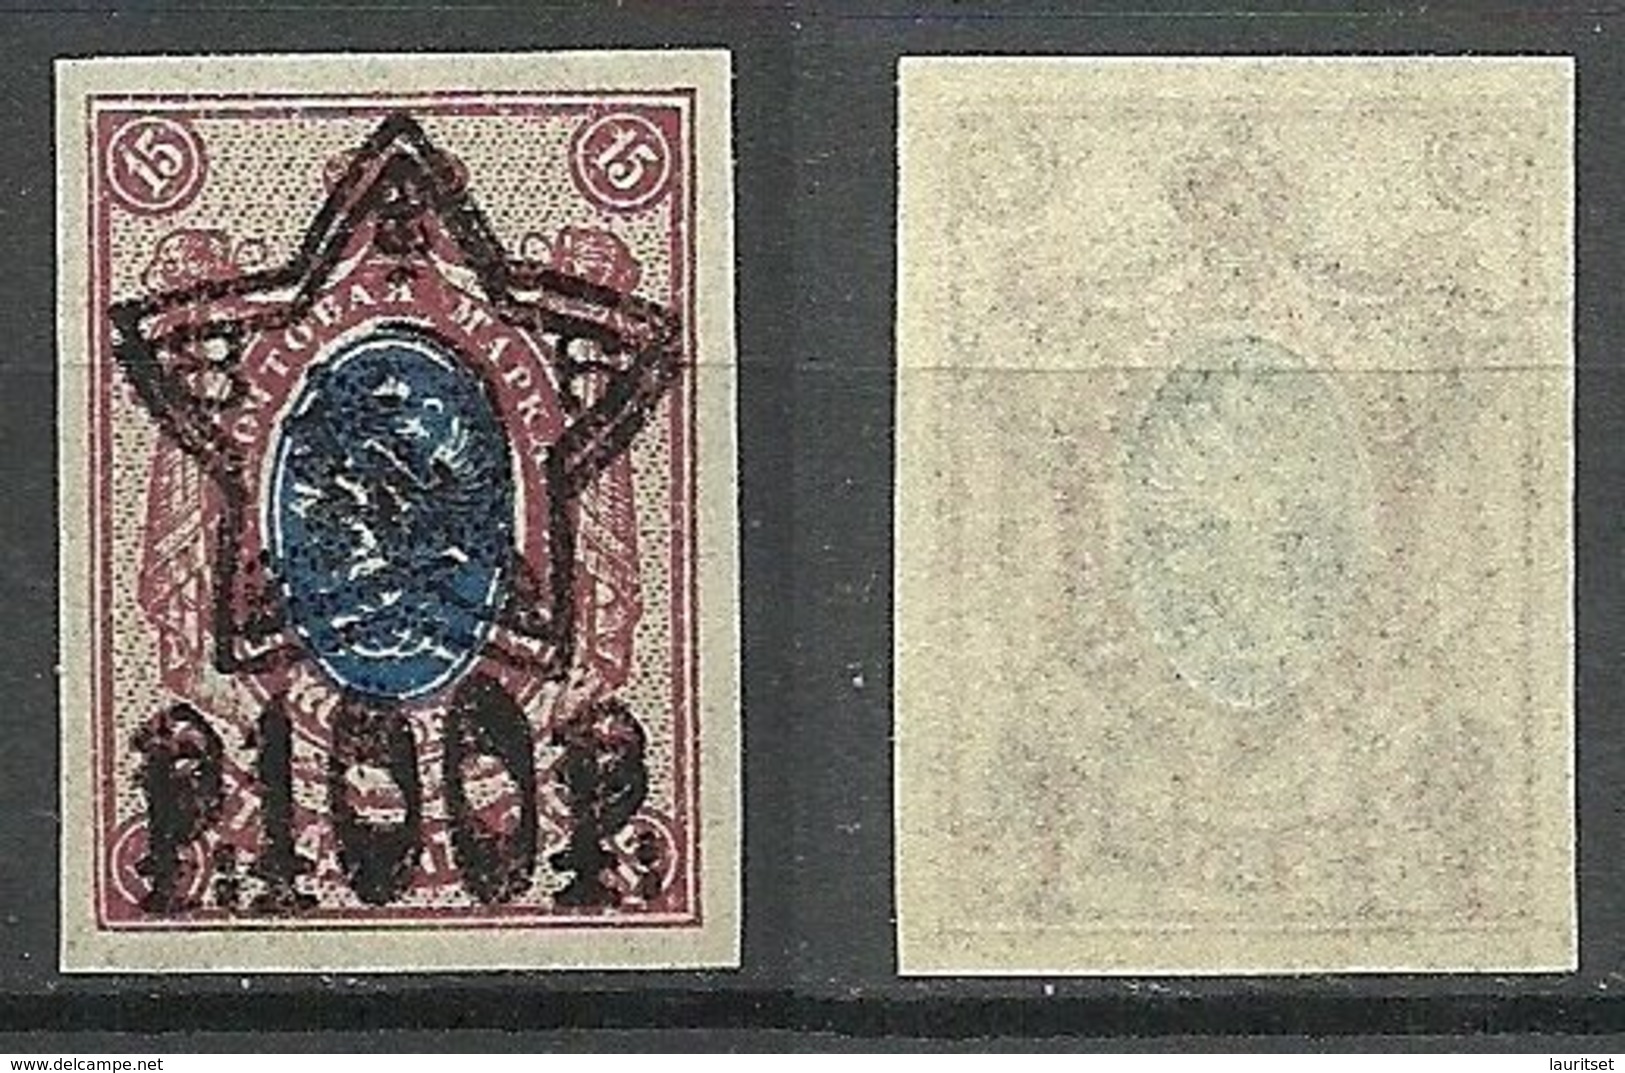 RUSSIA Russland Russia 1922 Michel 206 B I DOUBLE OPT ERROR Variety Abart MNH - Unused Stamps